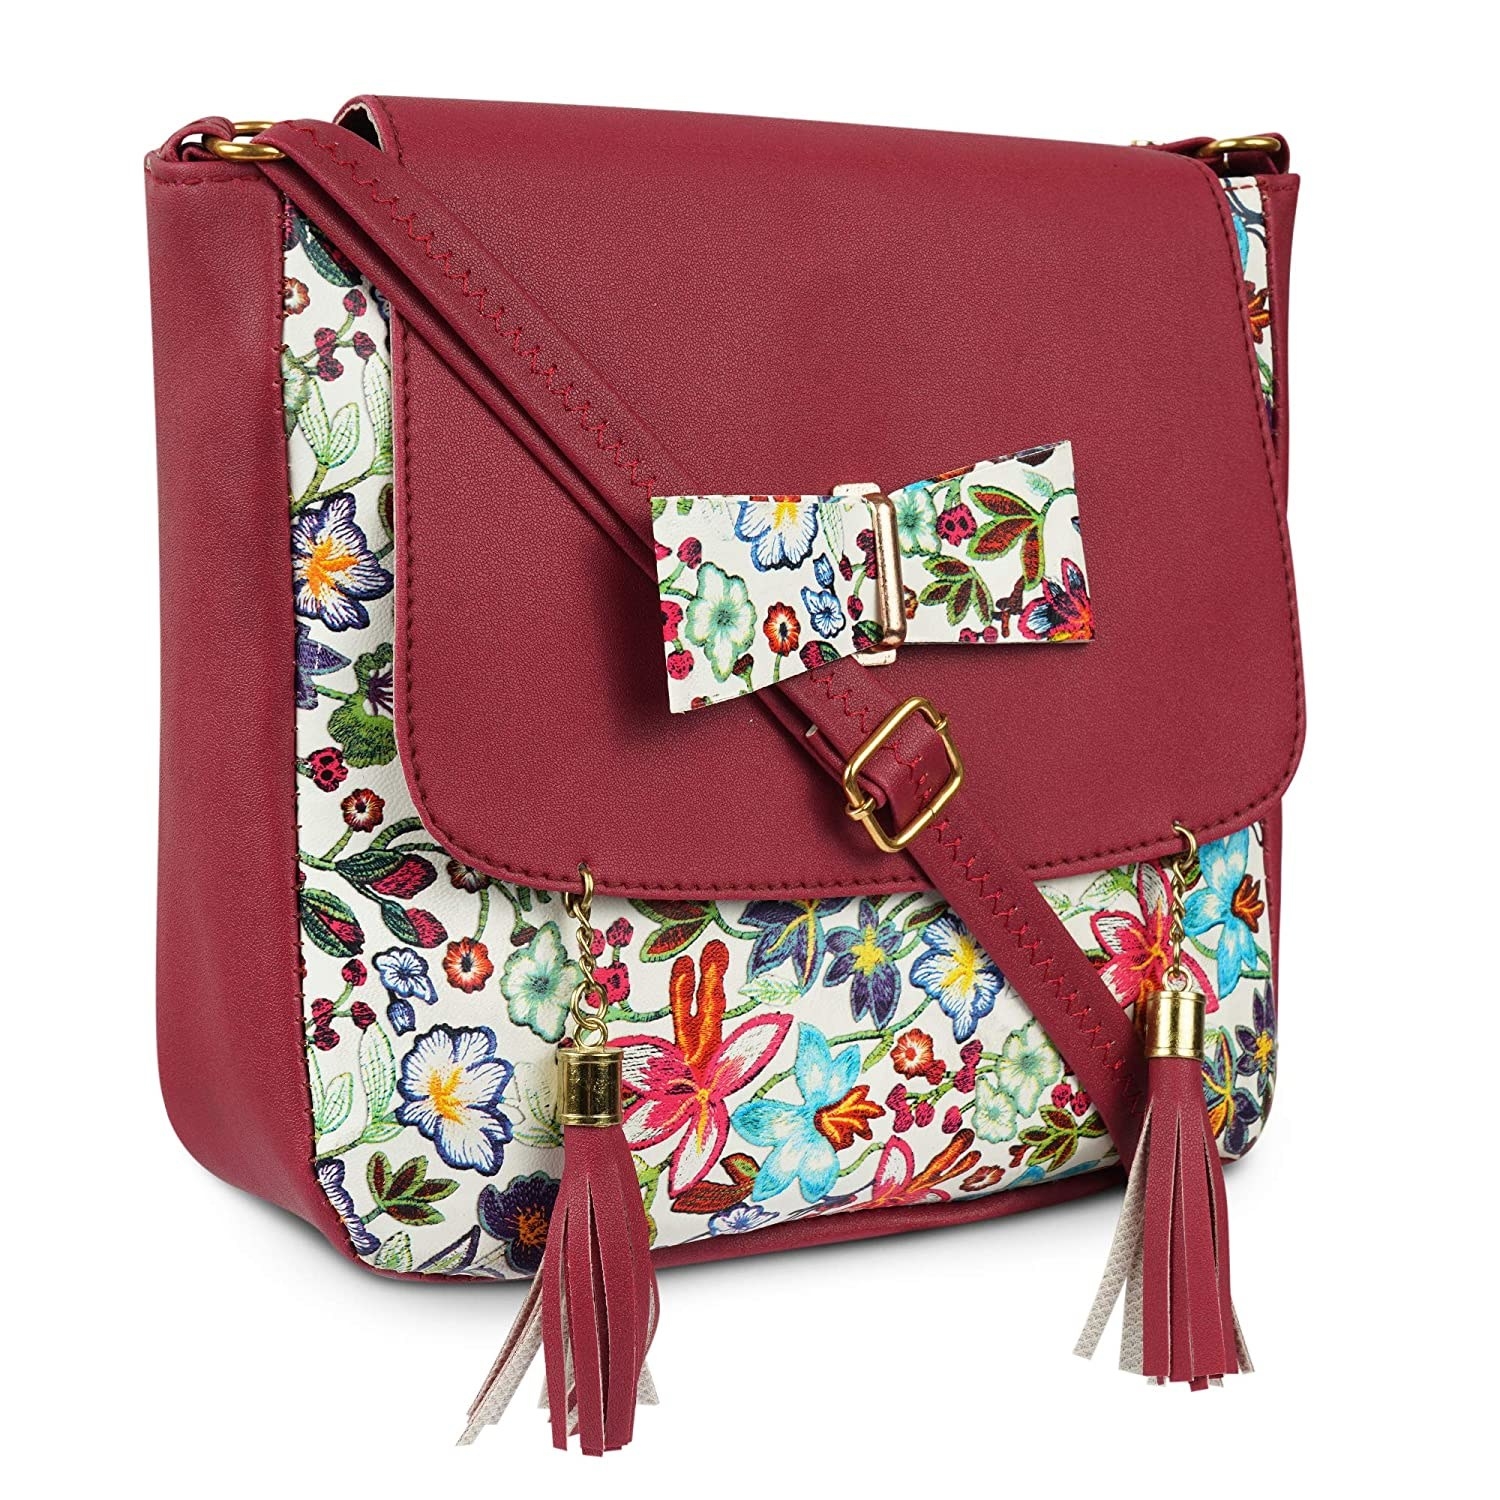 A dual-toned sling bag with red and floral prints having two tassels and one bow on it